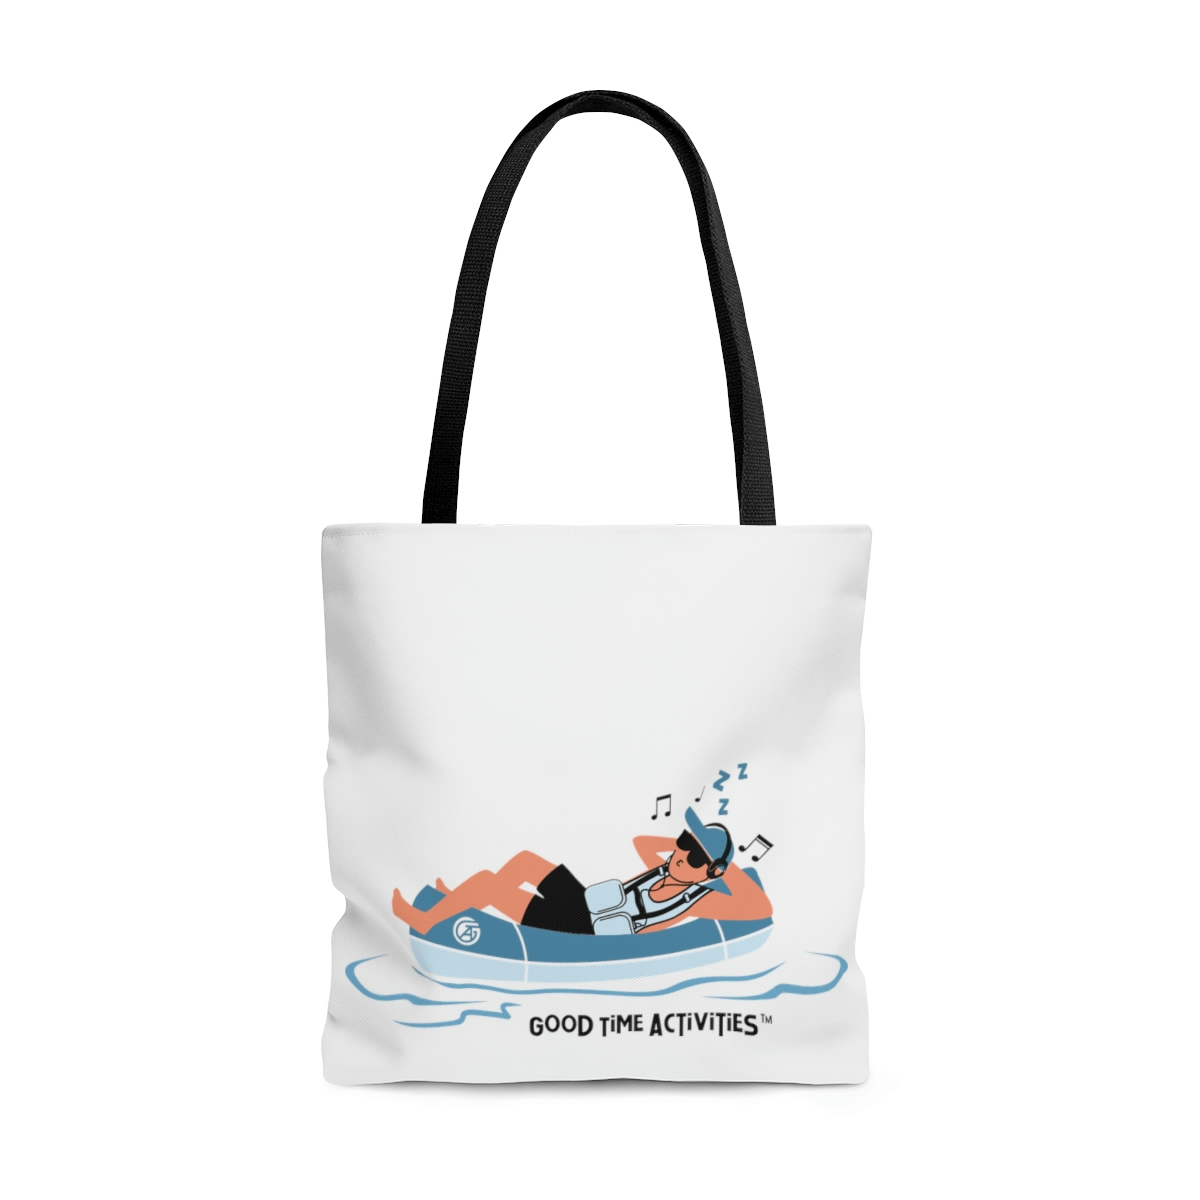 Lazy River - Tote Bag - Good Time Activities